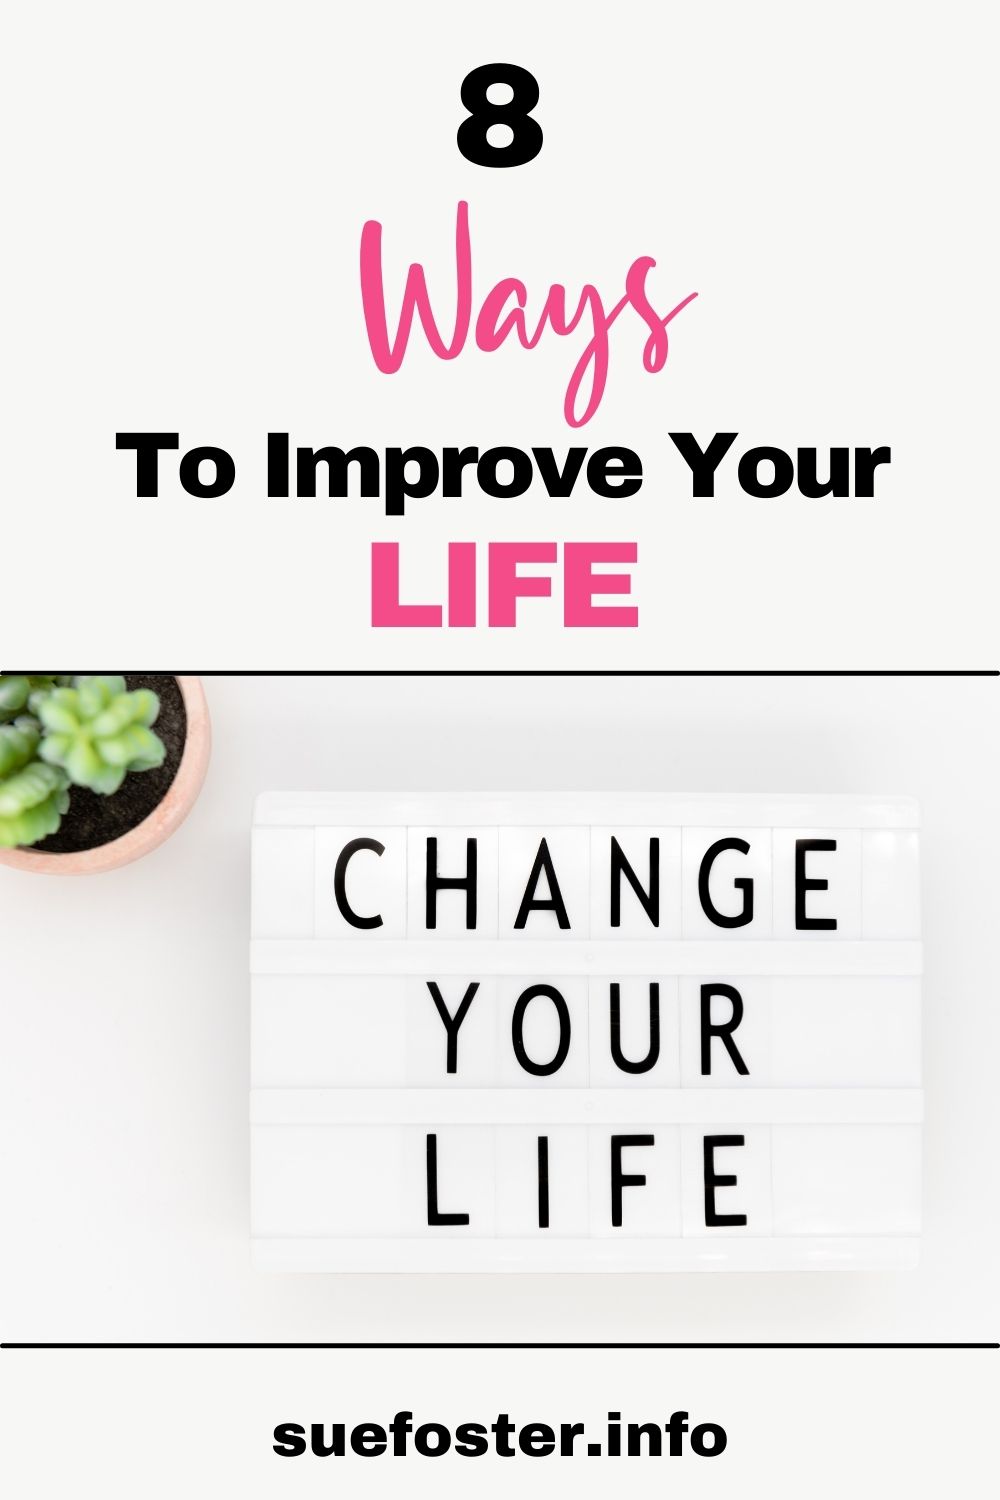 Transform your life affordably! Explore small changes like healthy eating and exercise to larger moves like career shifts or relocation. Discover budget-friendly tips for vitality and happiness.